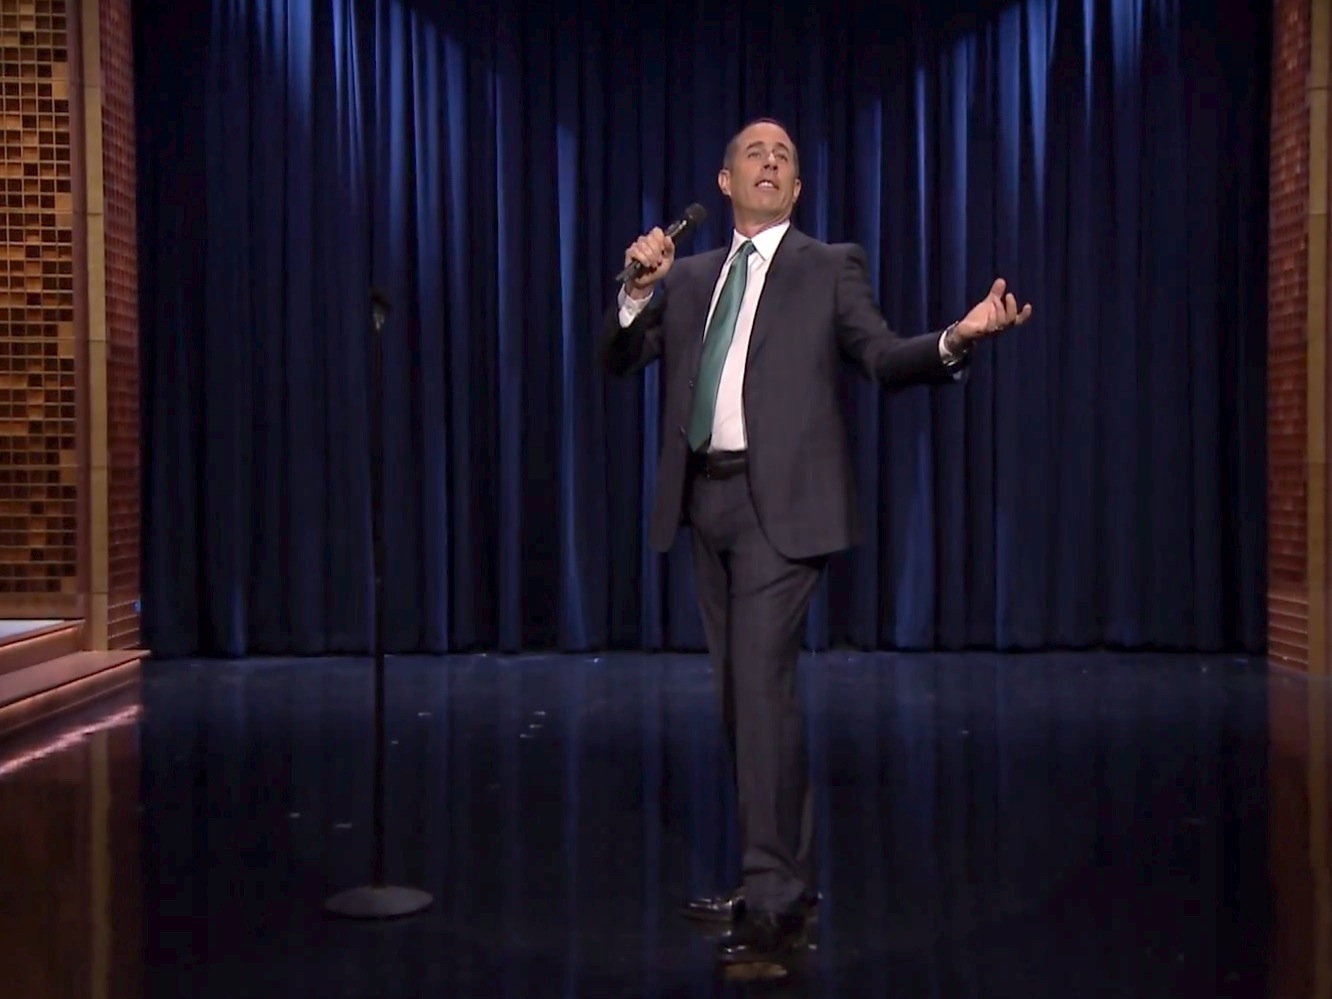 Seinfeld on smartphones and texting: "I could have called you and I chose not to."